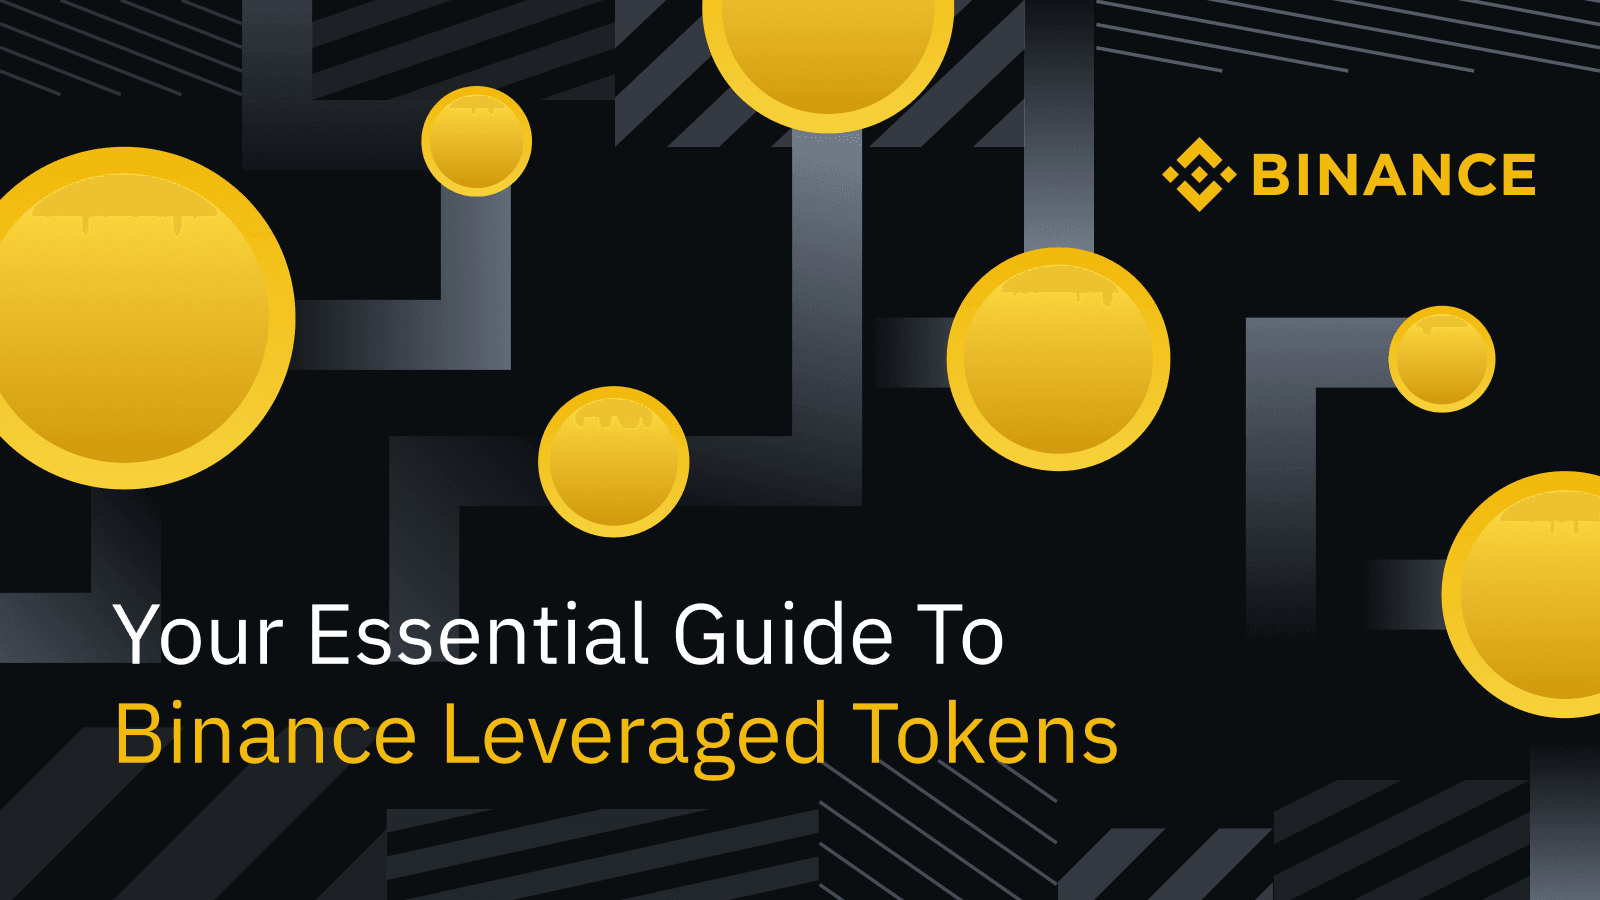 Your Essential Guide To Binance Leveraged Tokens